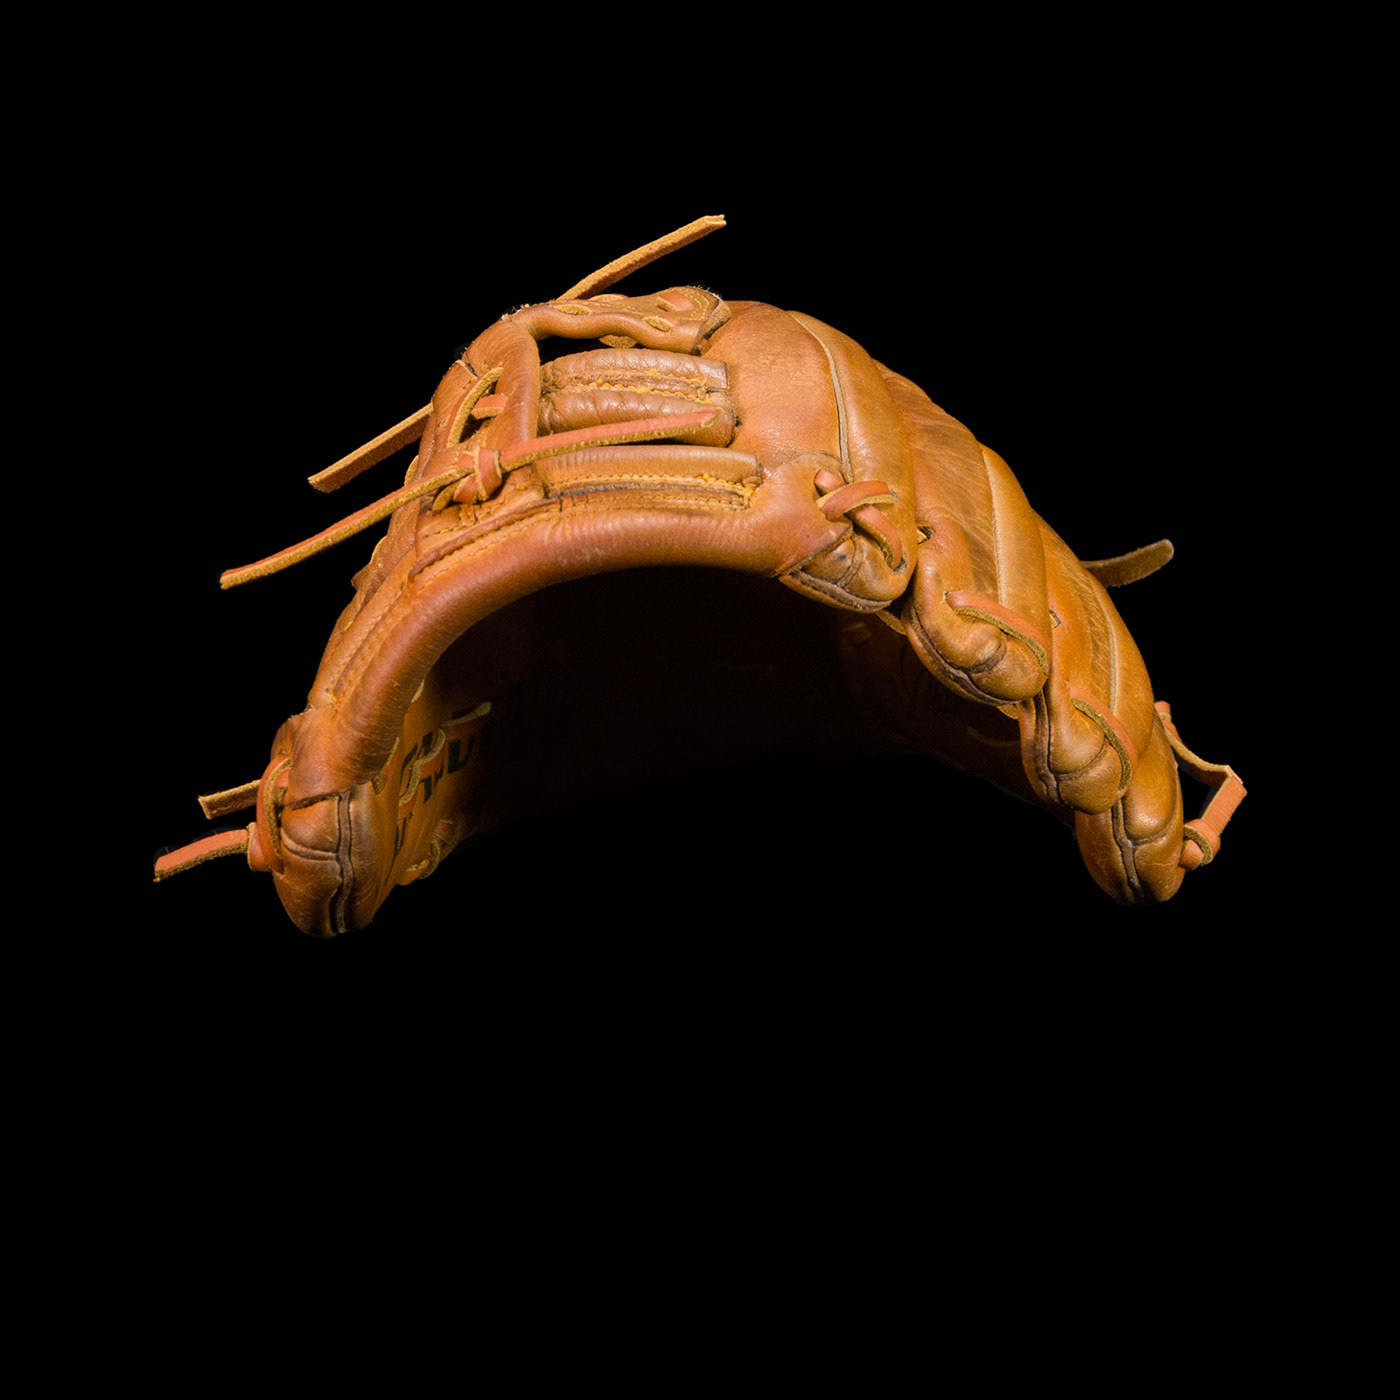 Baseball Glove Restore Gowdy Gloves Baseball Glove Relace Sports Design sports Before and After leather Dave Kingman Gowdy Design spalding